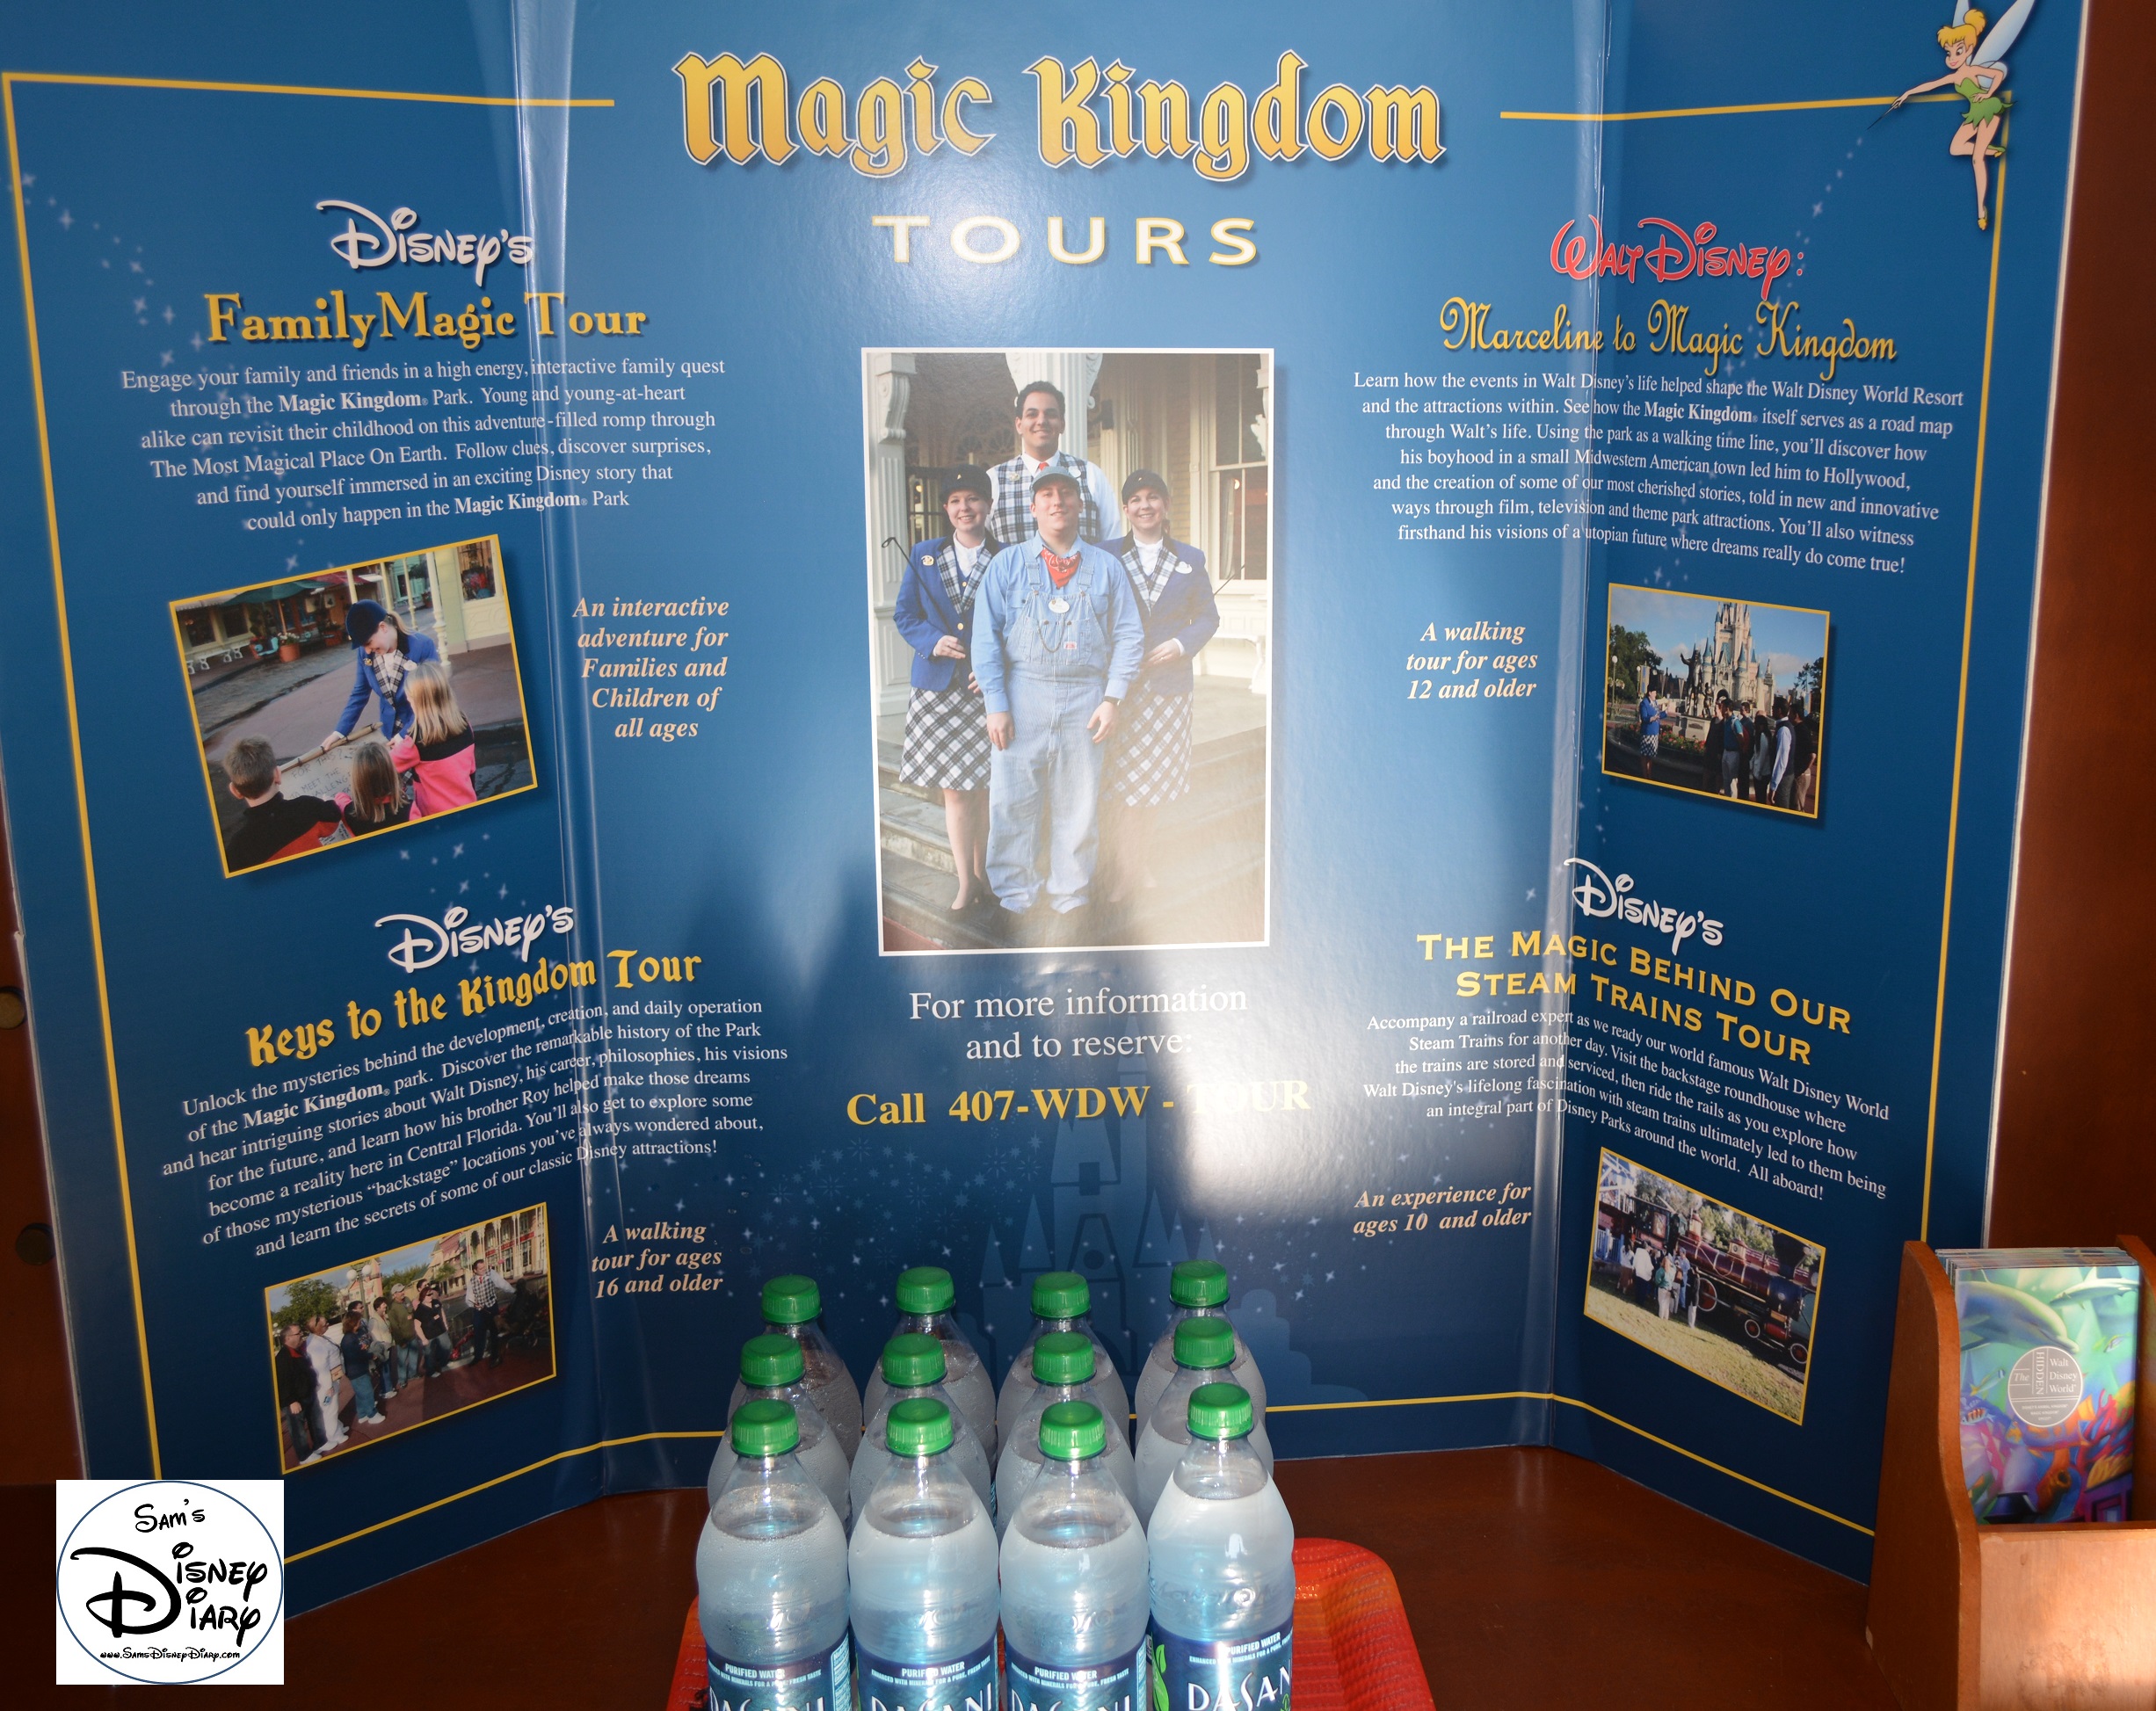 Keys to the Kingdom is just one of the many Magic Kingdom Tour Offerings 